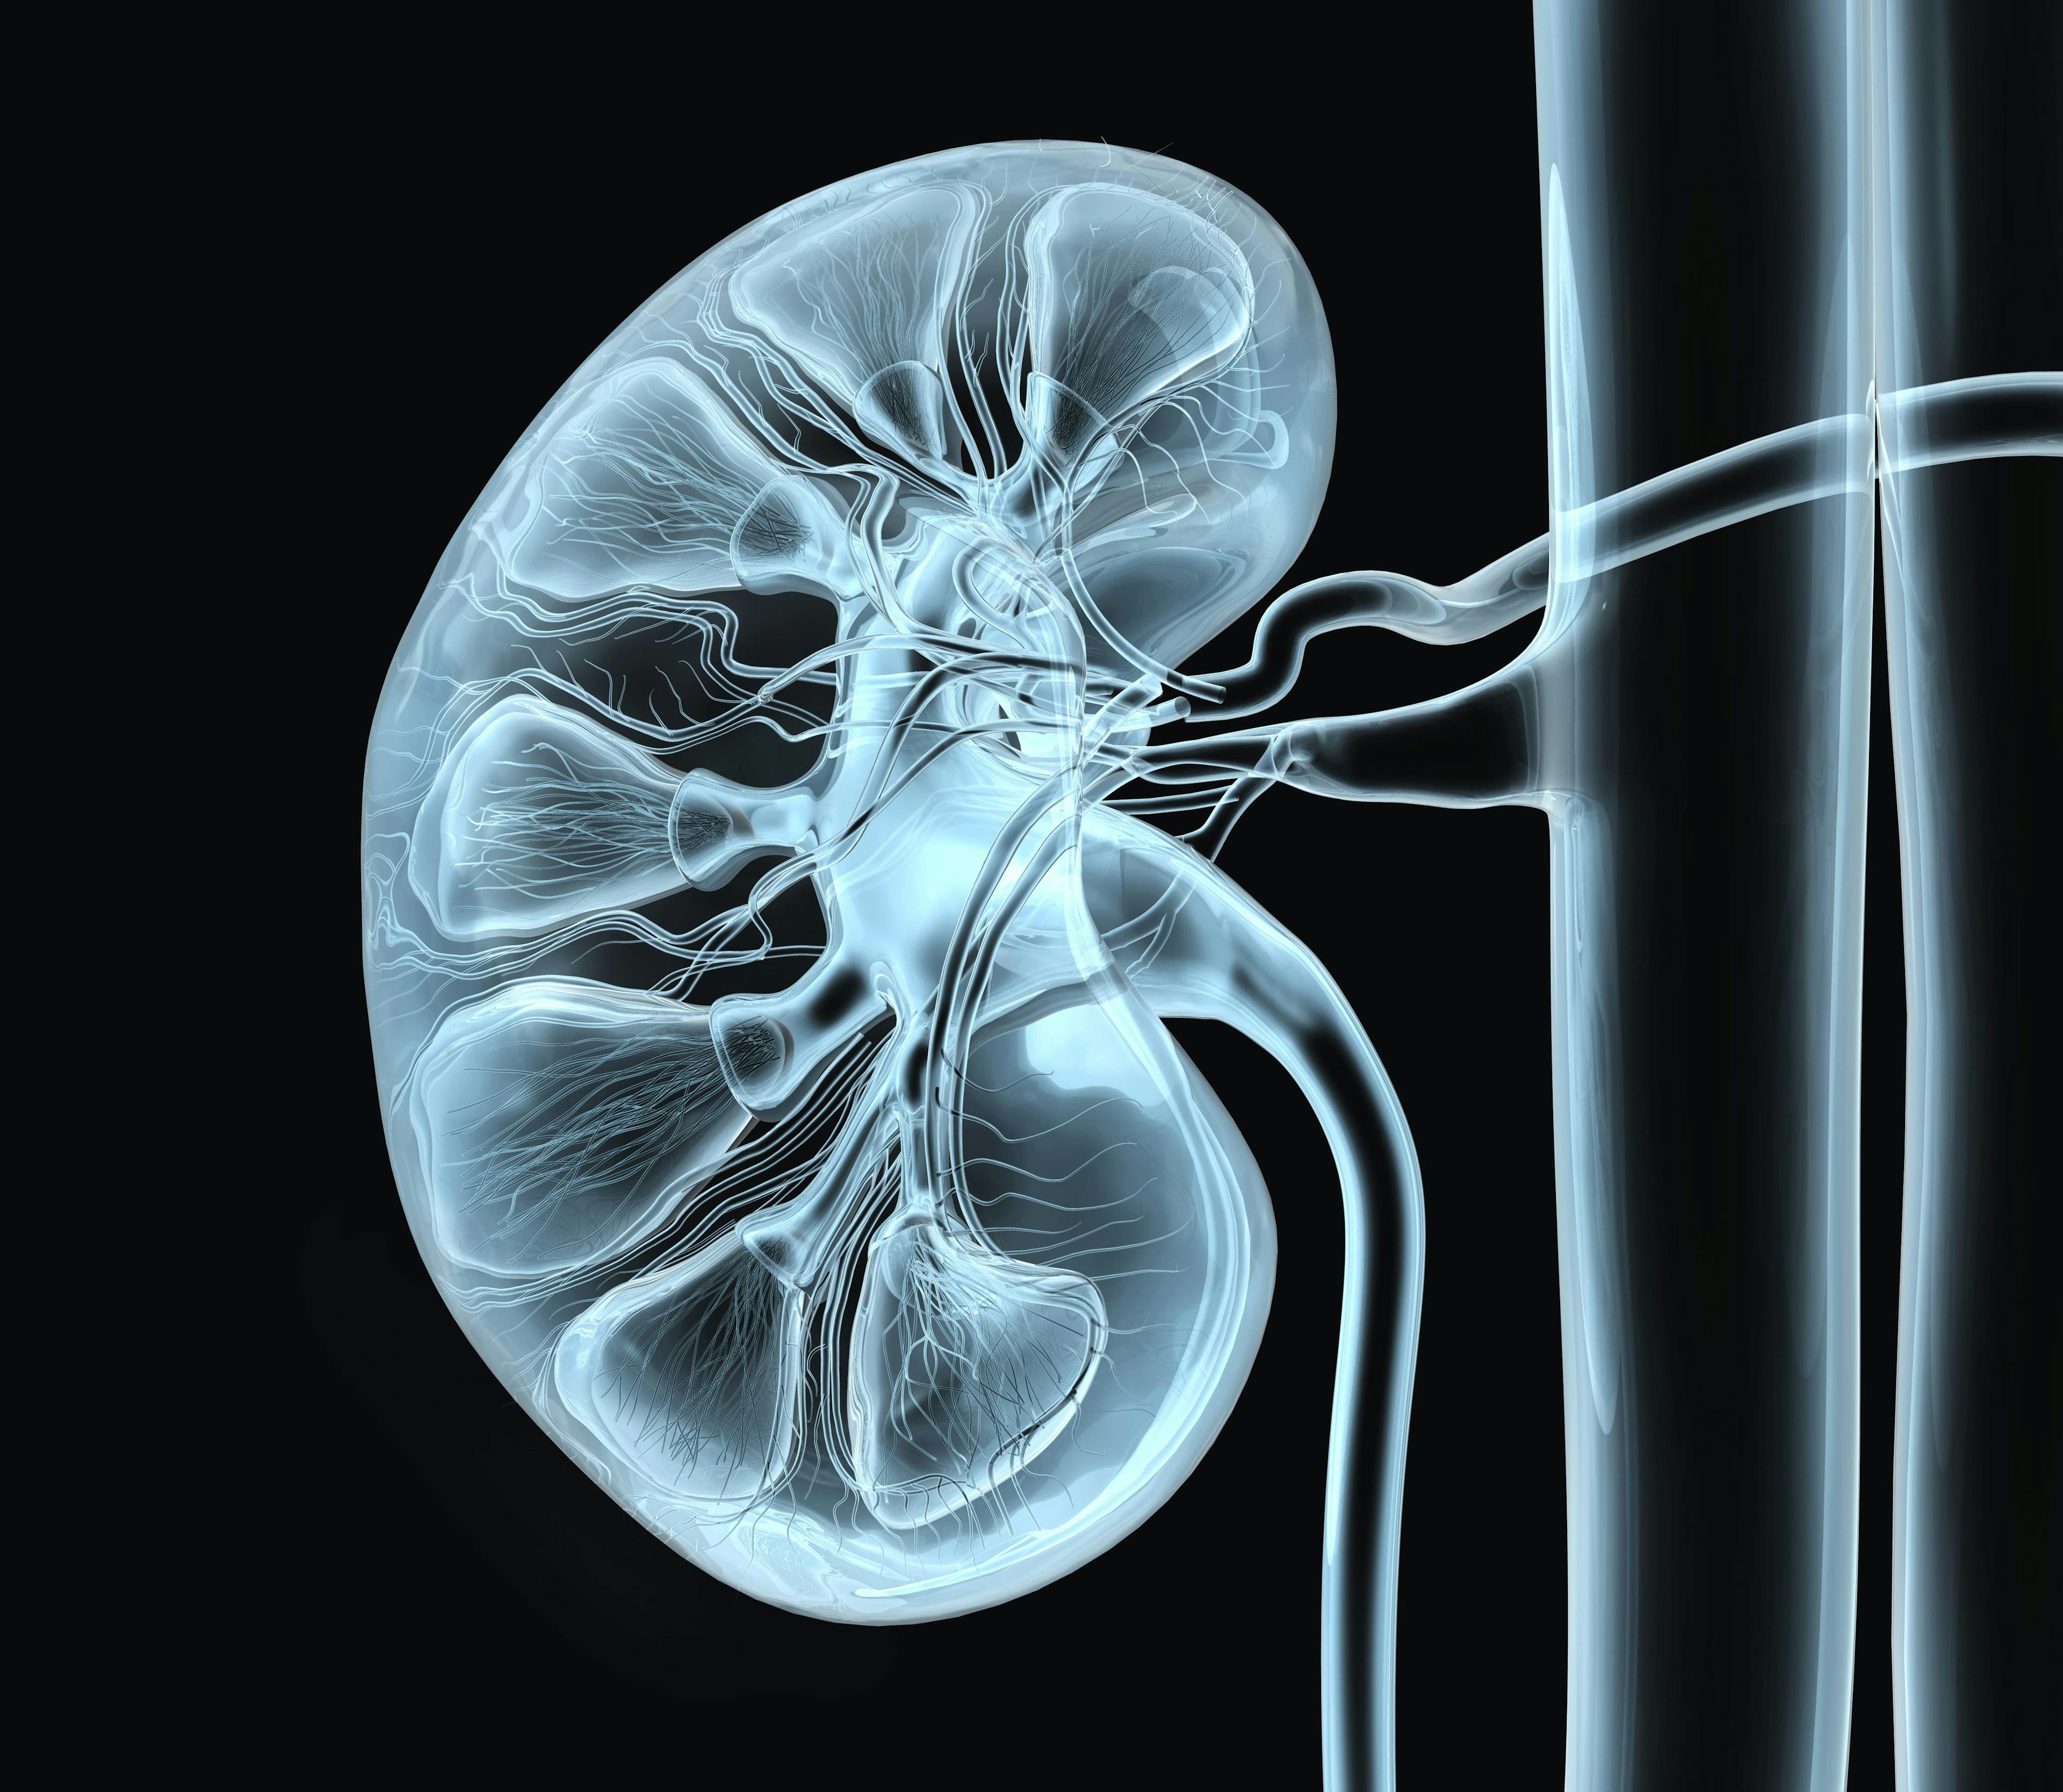 The improvements occur regardless of PD-L1 status among patients receiving lenvatinib plus pembrolizumab for advanced renal cell carcinoma in the phase 3 CLEAR study.